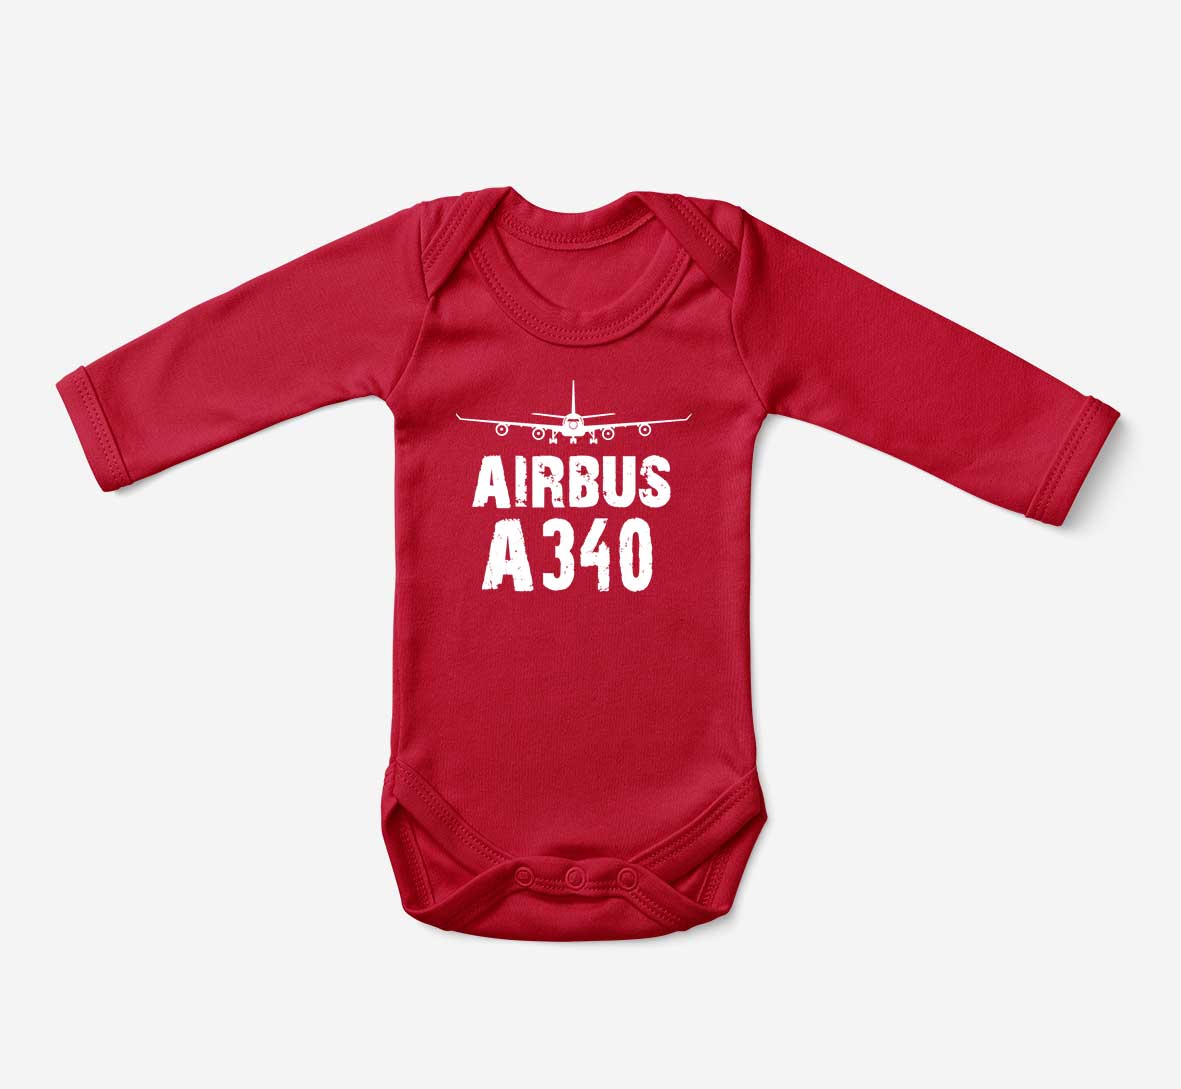 Airbus A340 & Plane Designed Baby Bodysuits